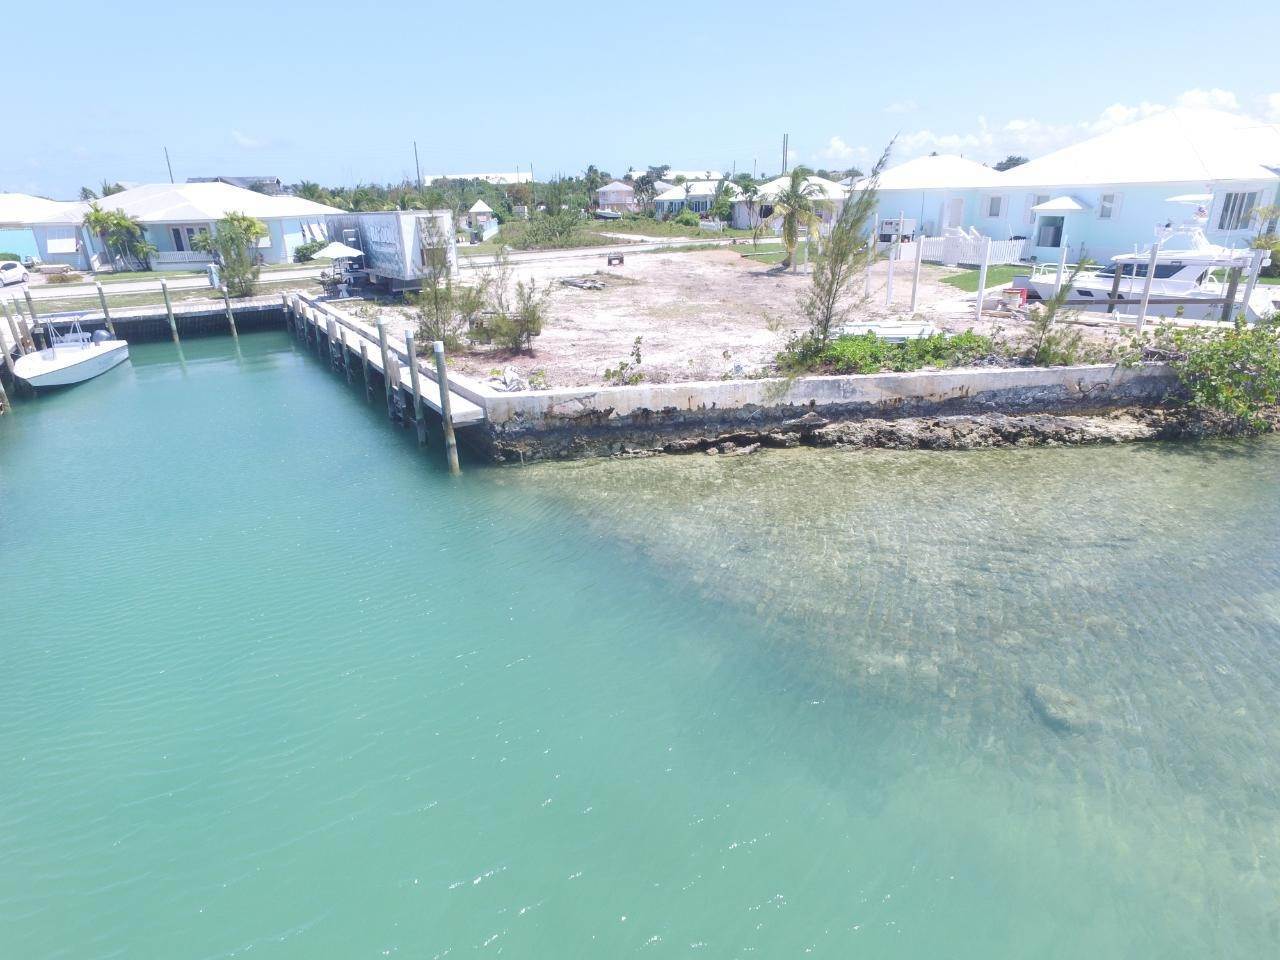 14. Lots / Acreage for Sale at Marsh Harbour, Abaco, Bahamas